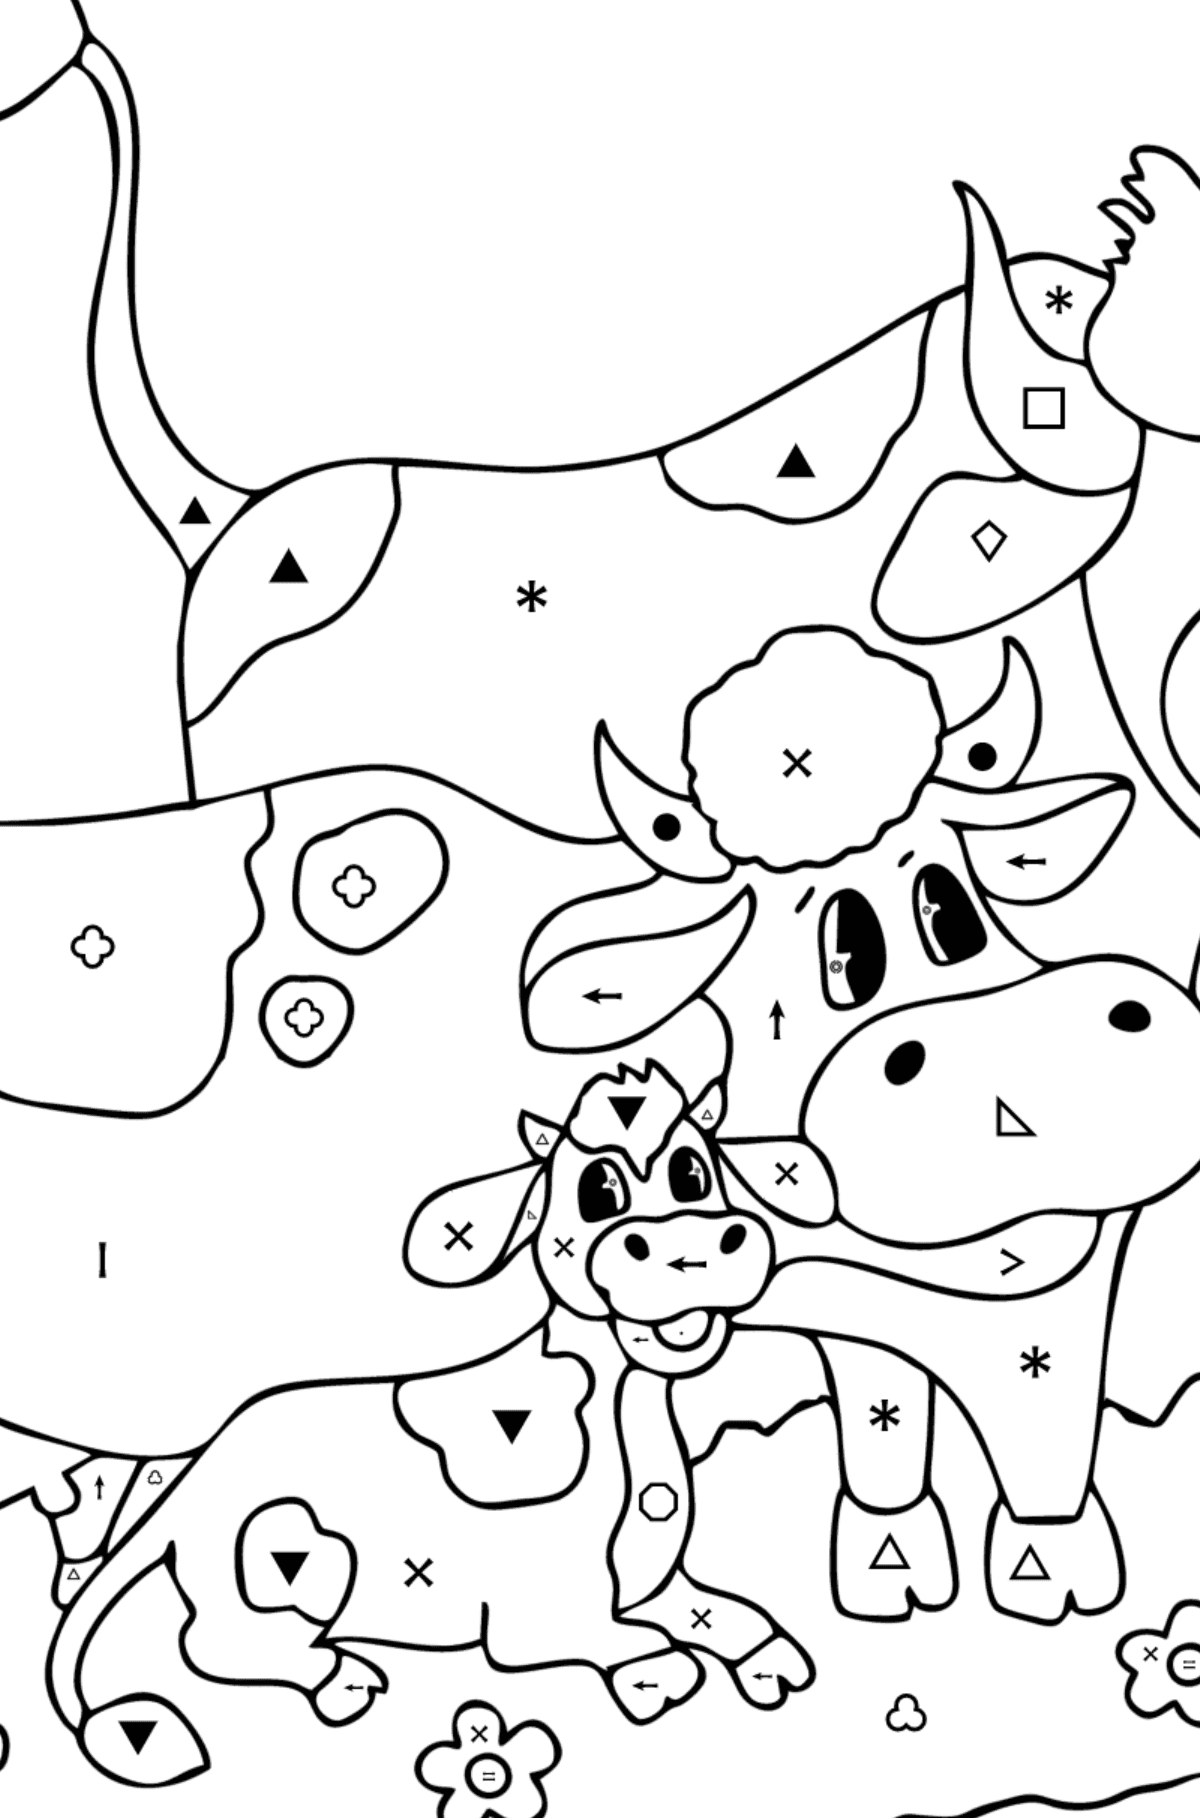 Cow, bull and calf coloring page - Coloring by Symbols and Geometric Shapes for Kids